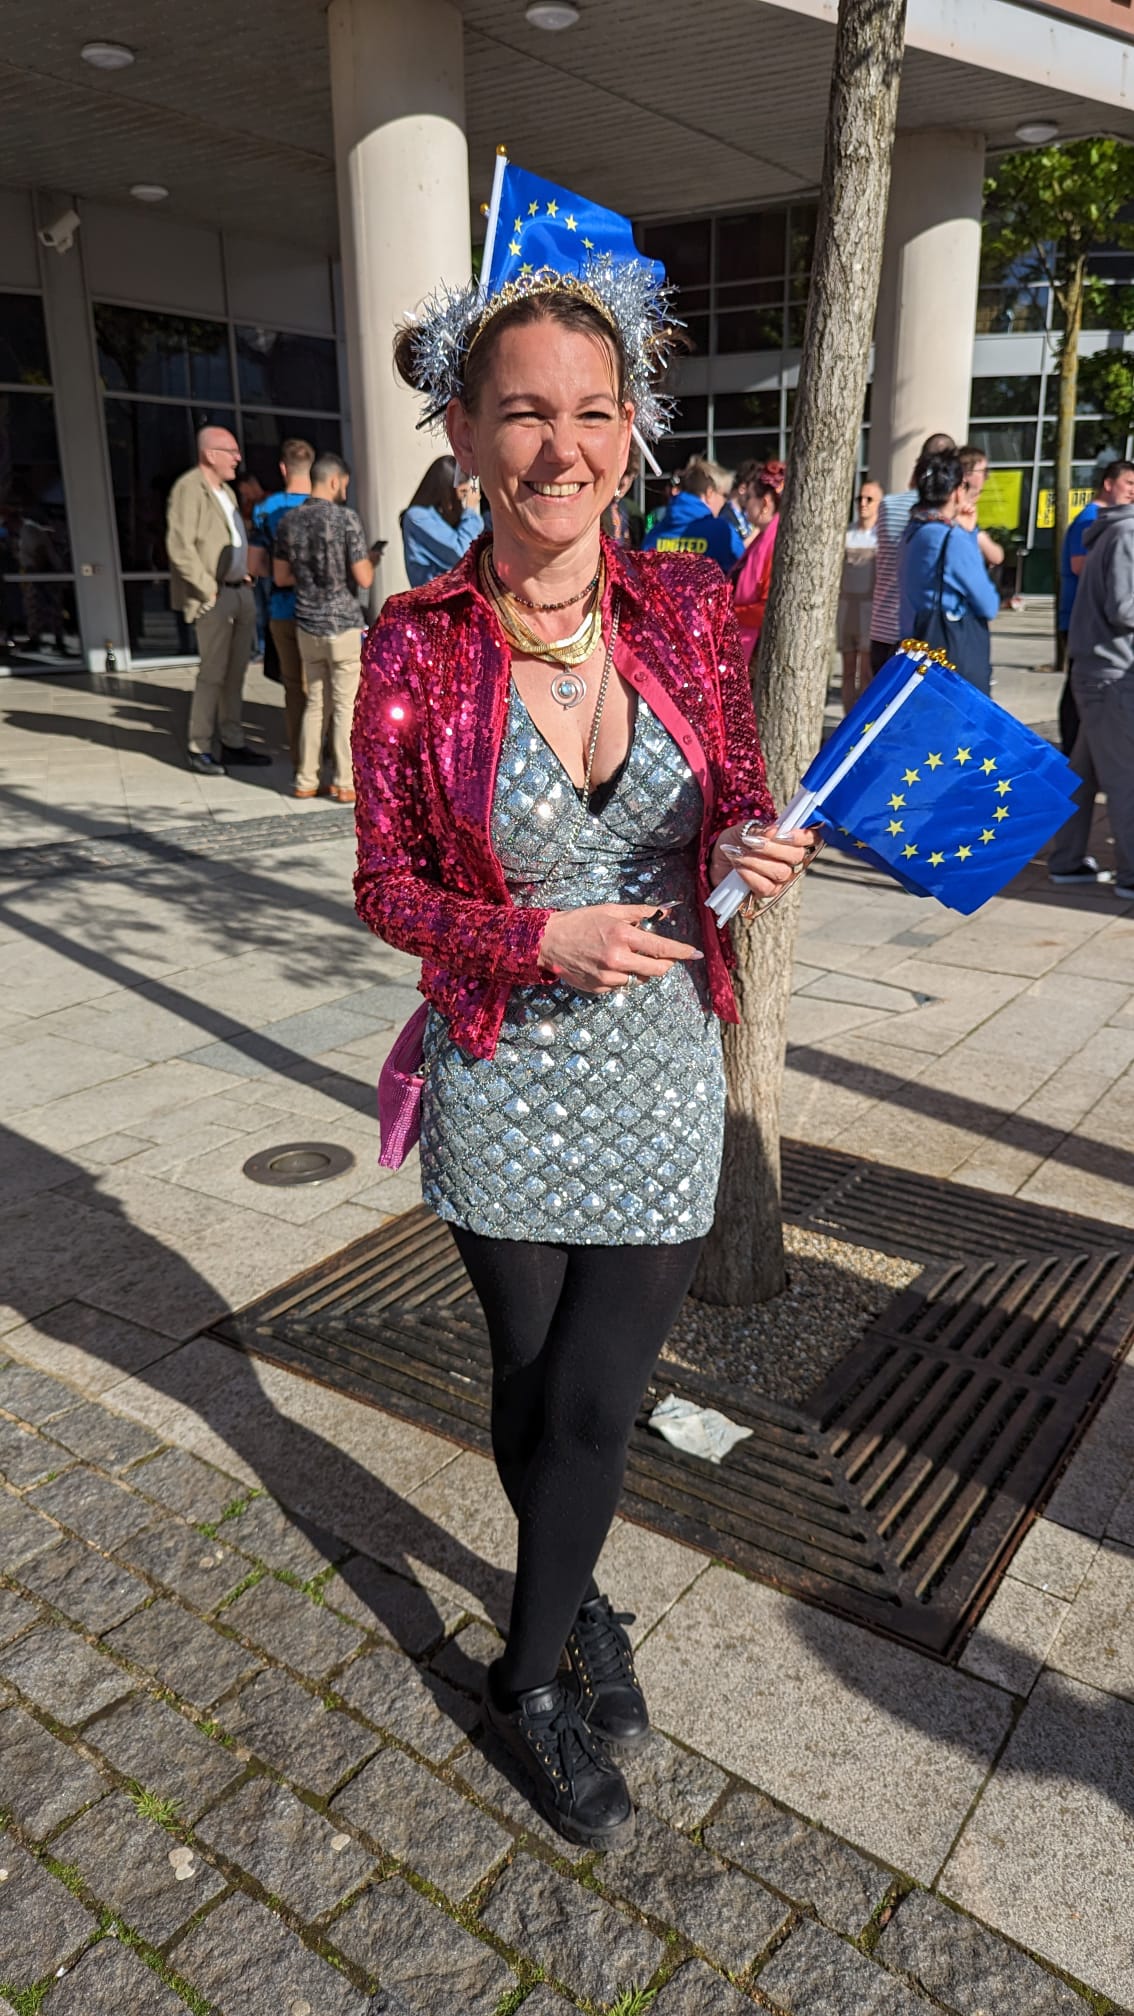 EU flags are handed out at Eurovision. Will the BBC let them in?